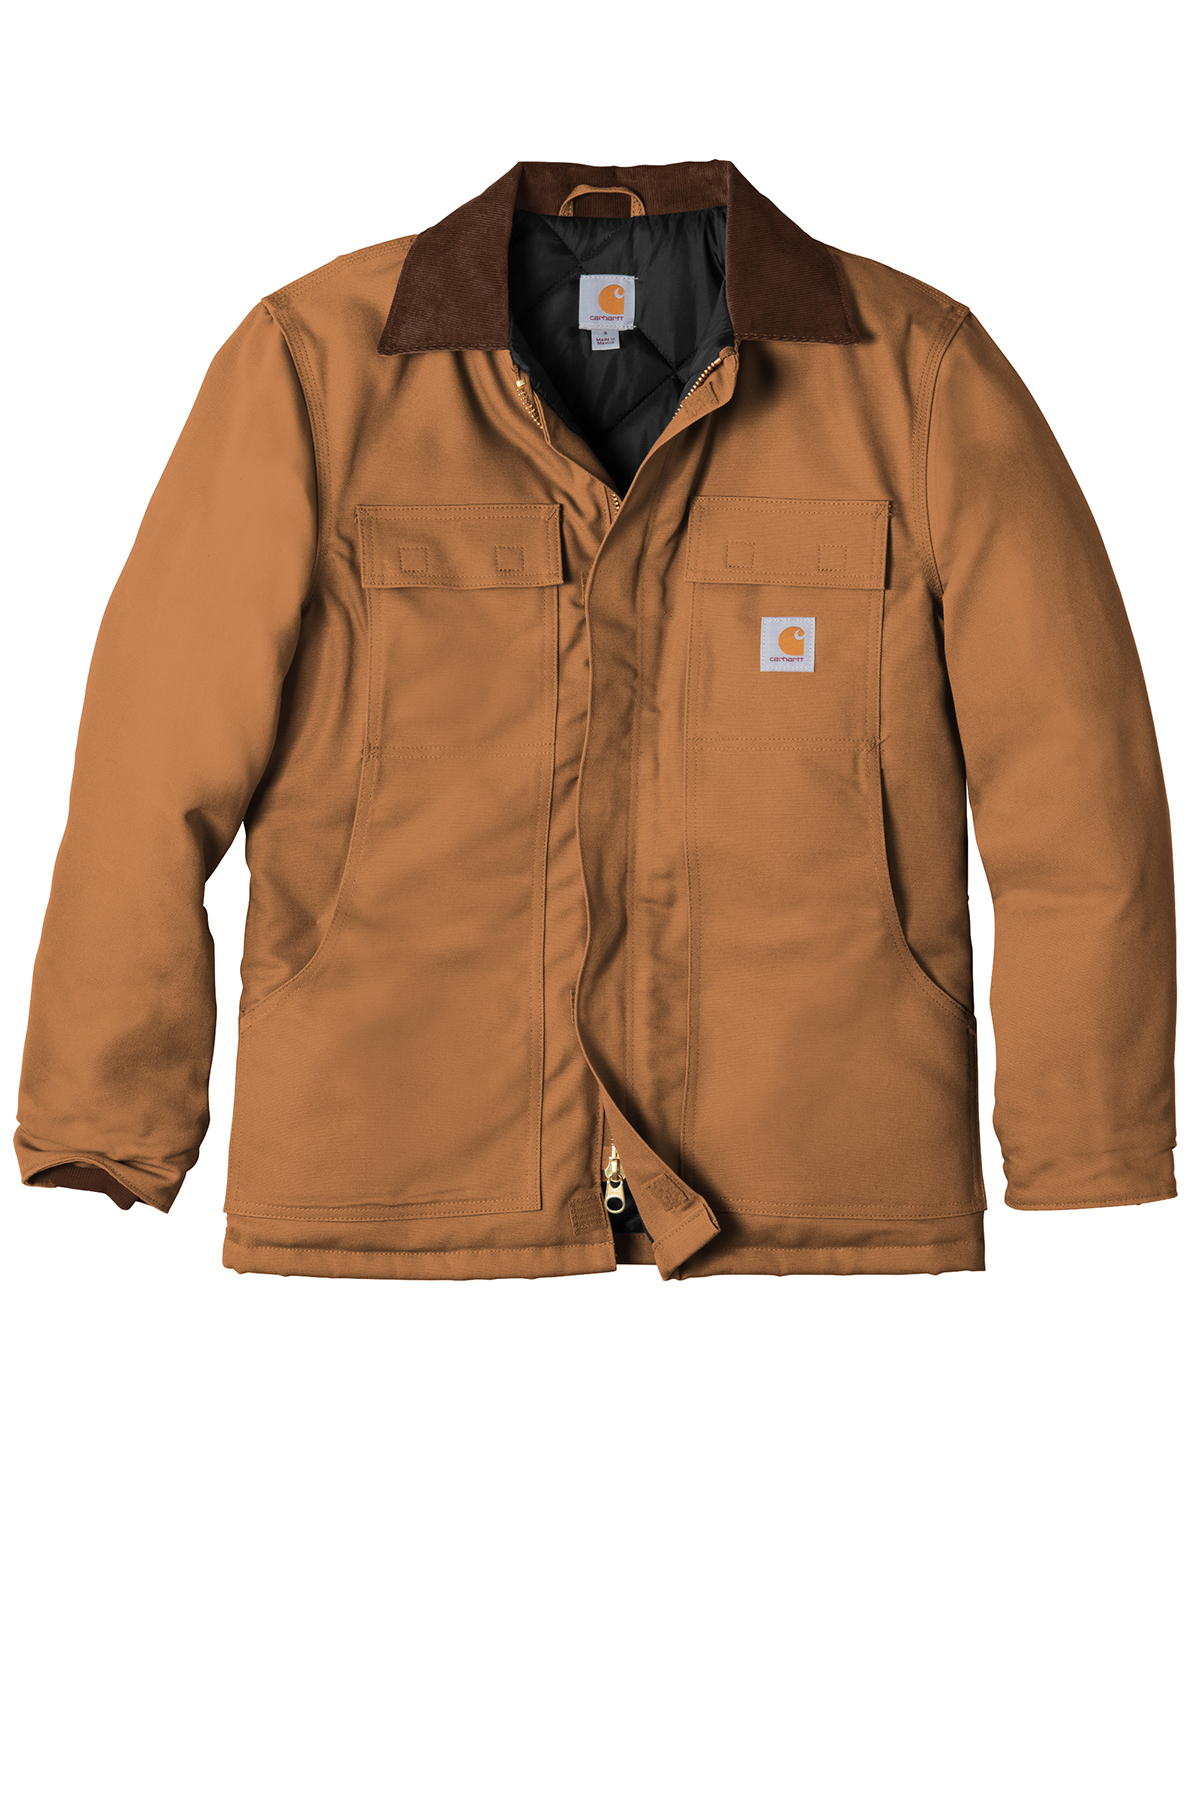 Carhartt Duck Traditional Coat | Product | Company Casuals